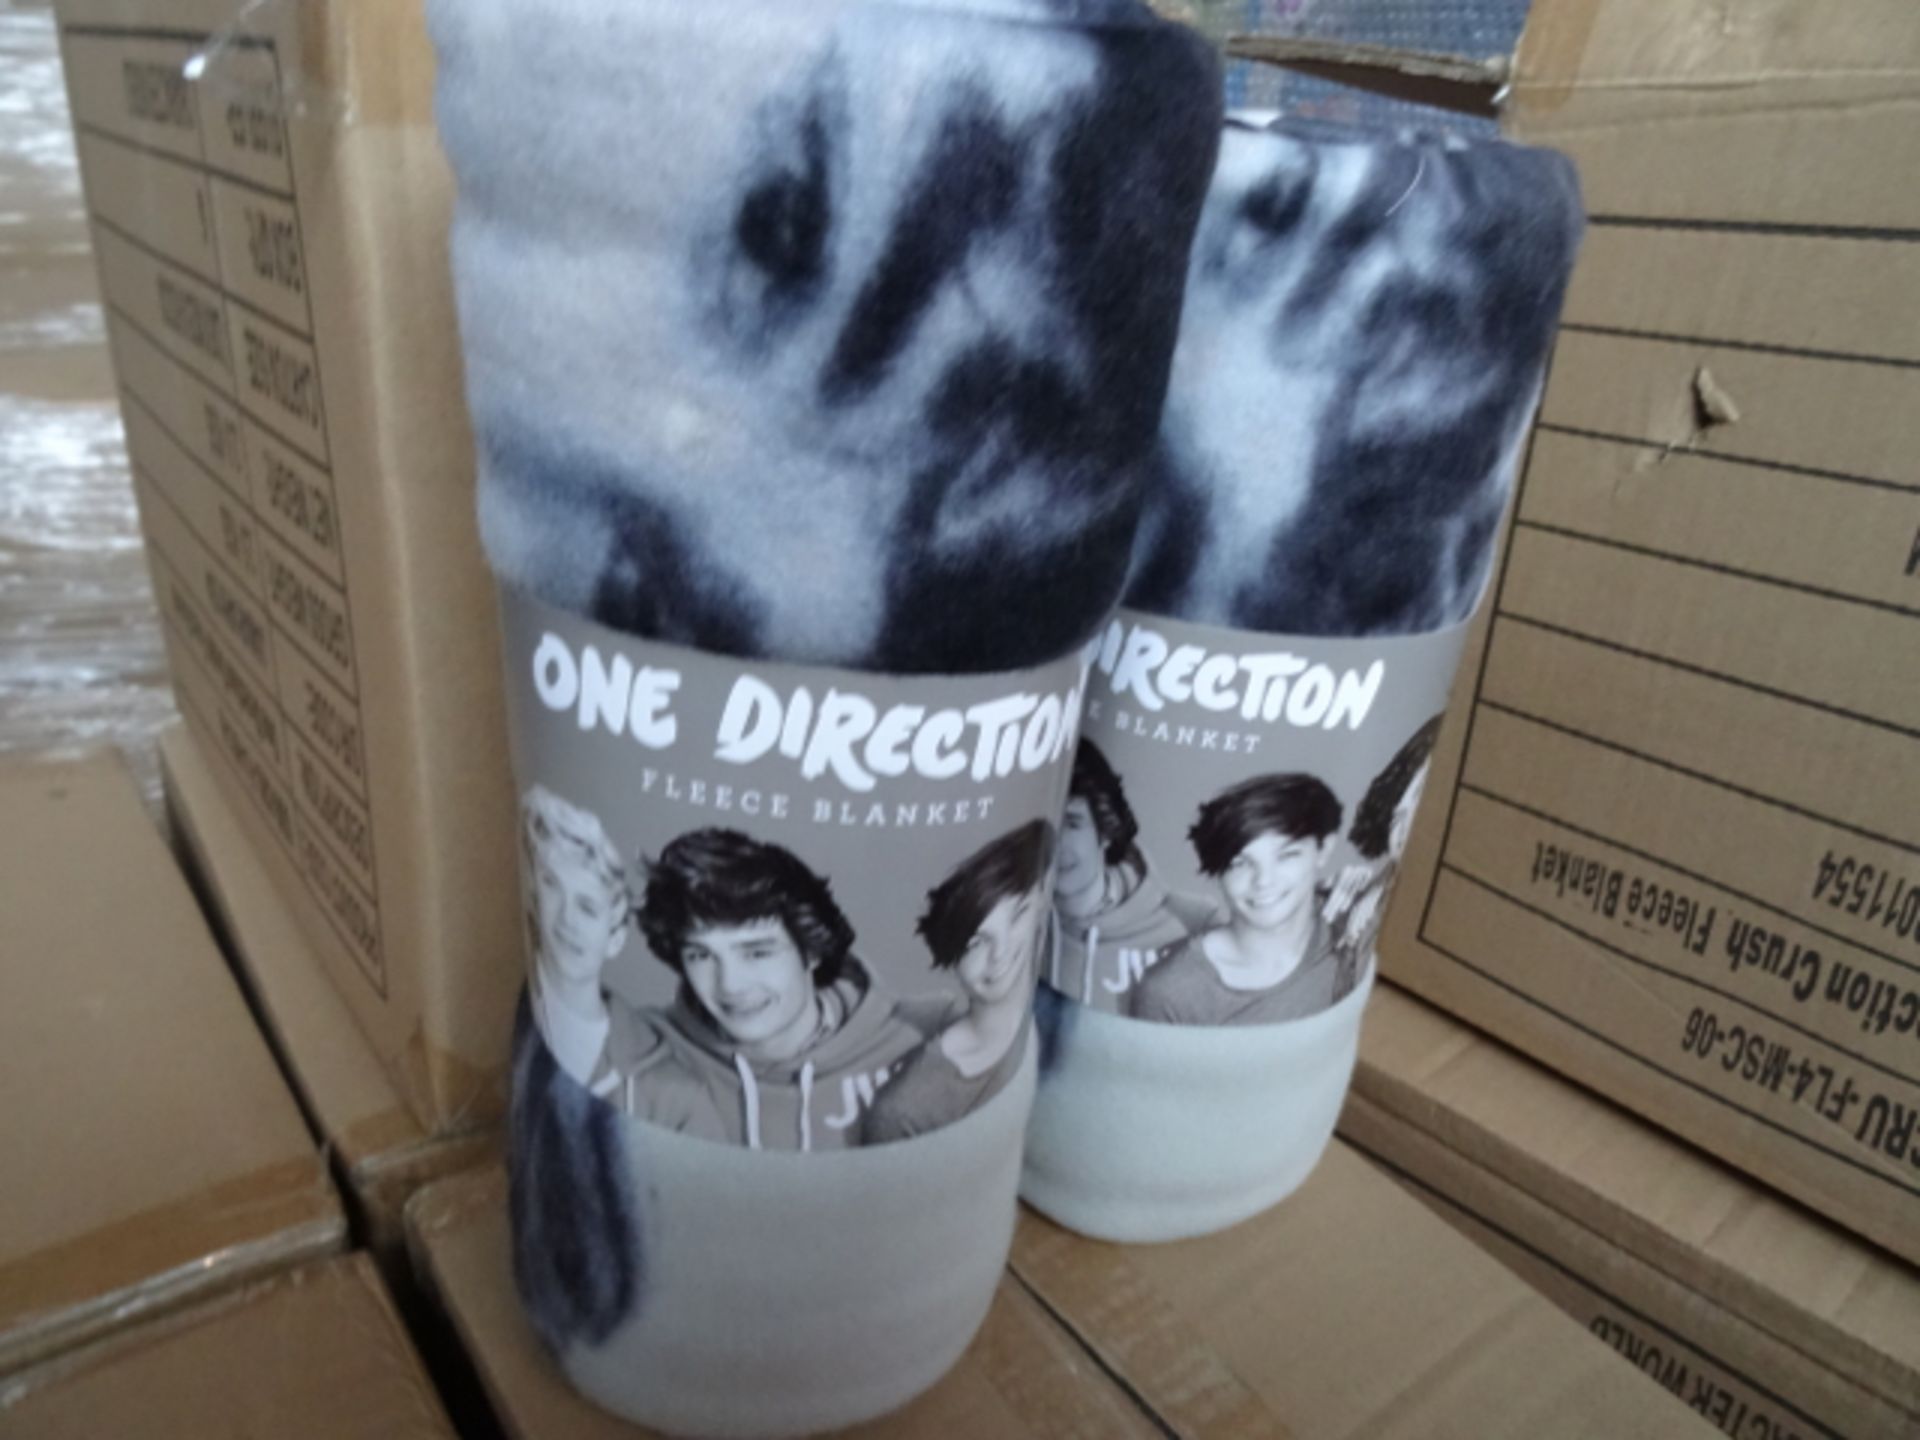 2 x One Direction Fleece Blankets! Just in time for this chilly winter! 120 x 150cm. High retail